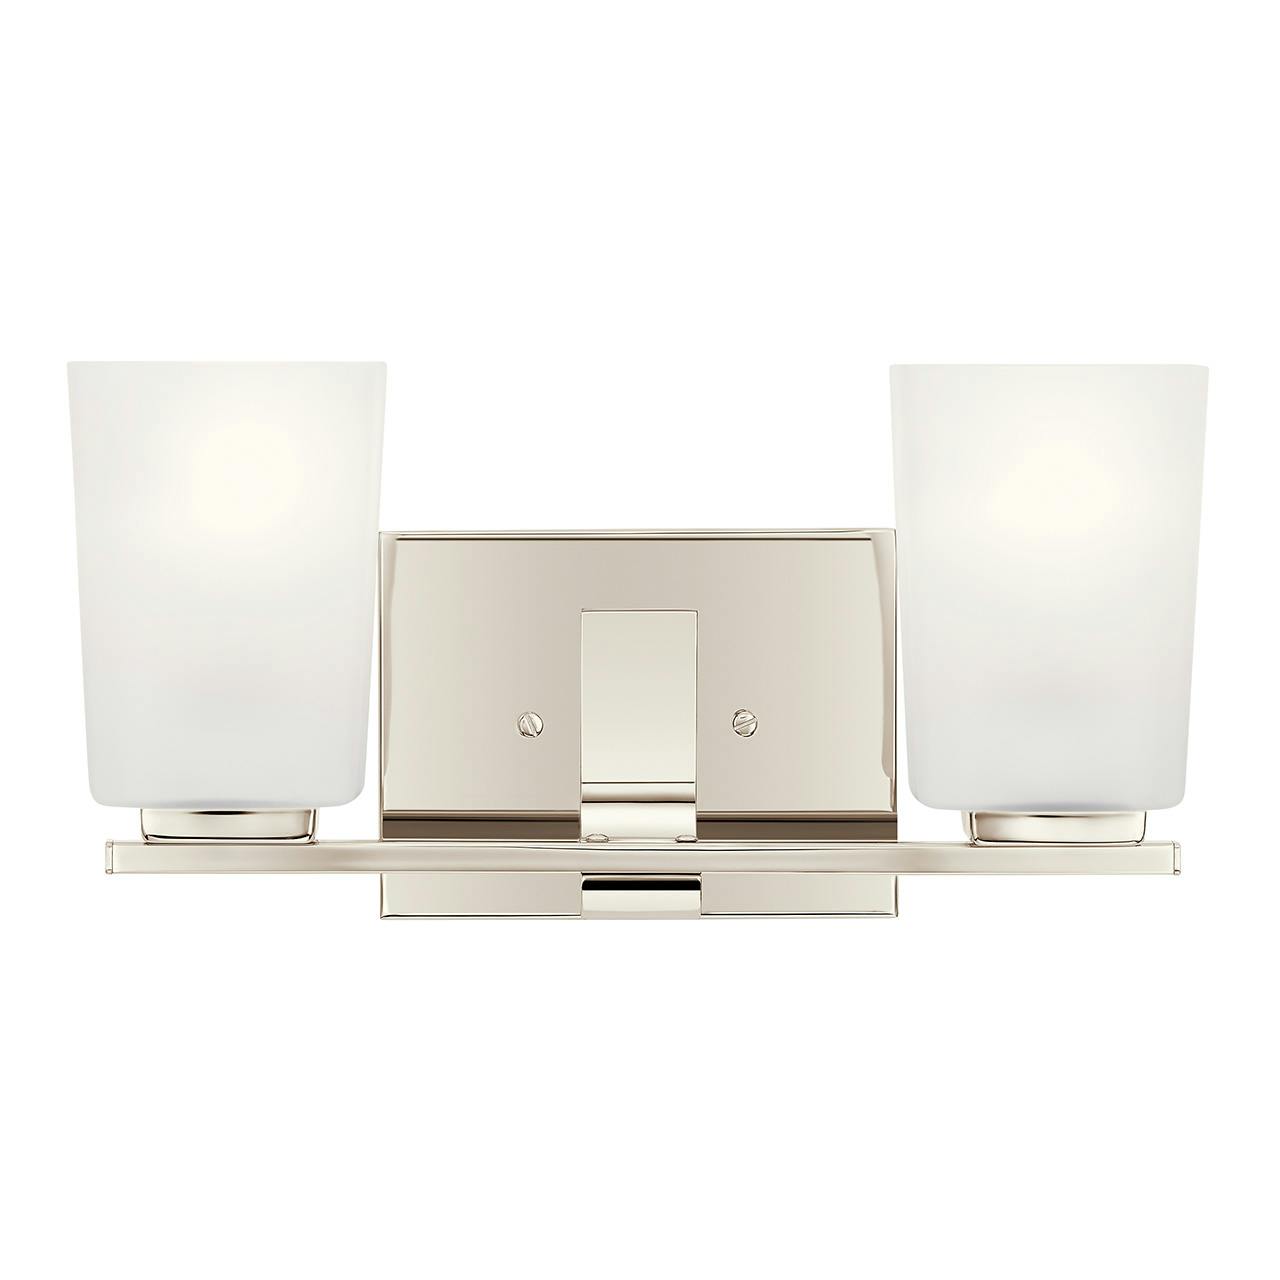 The Roehm 2 Light Vanity Light Nickel facing up on a white background